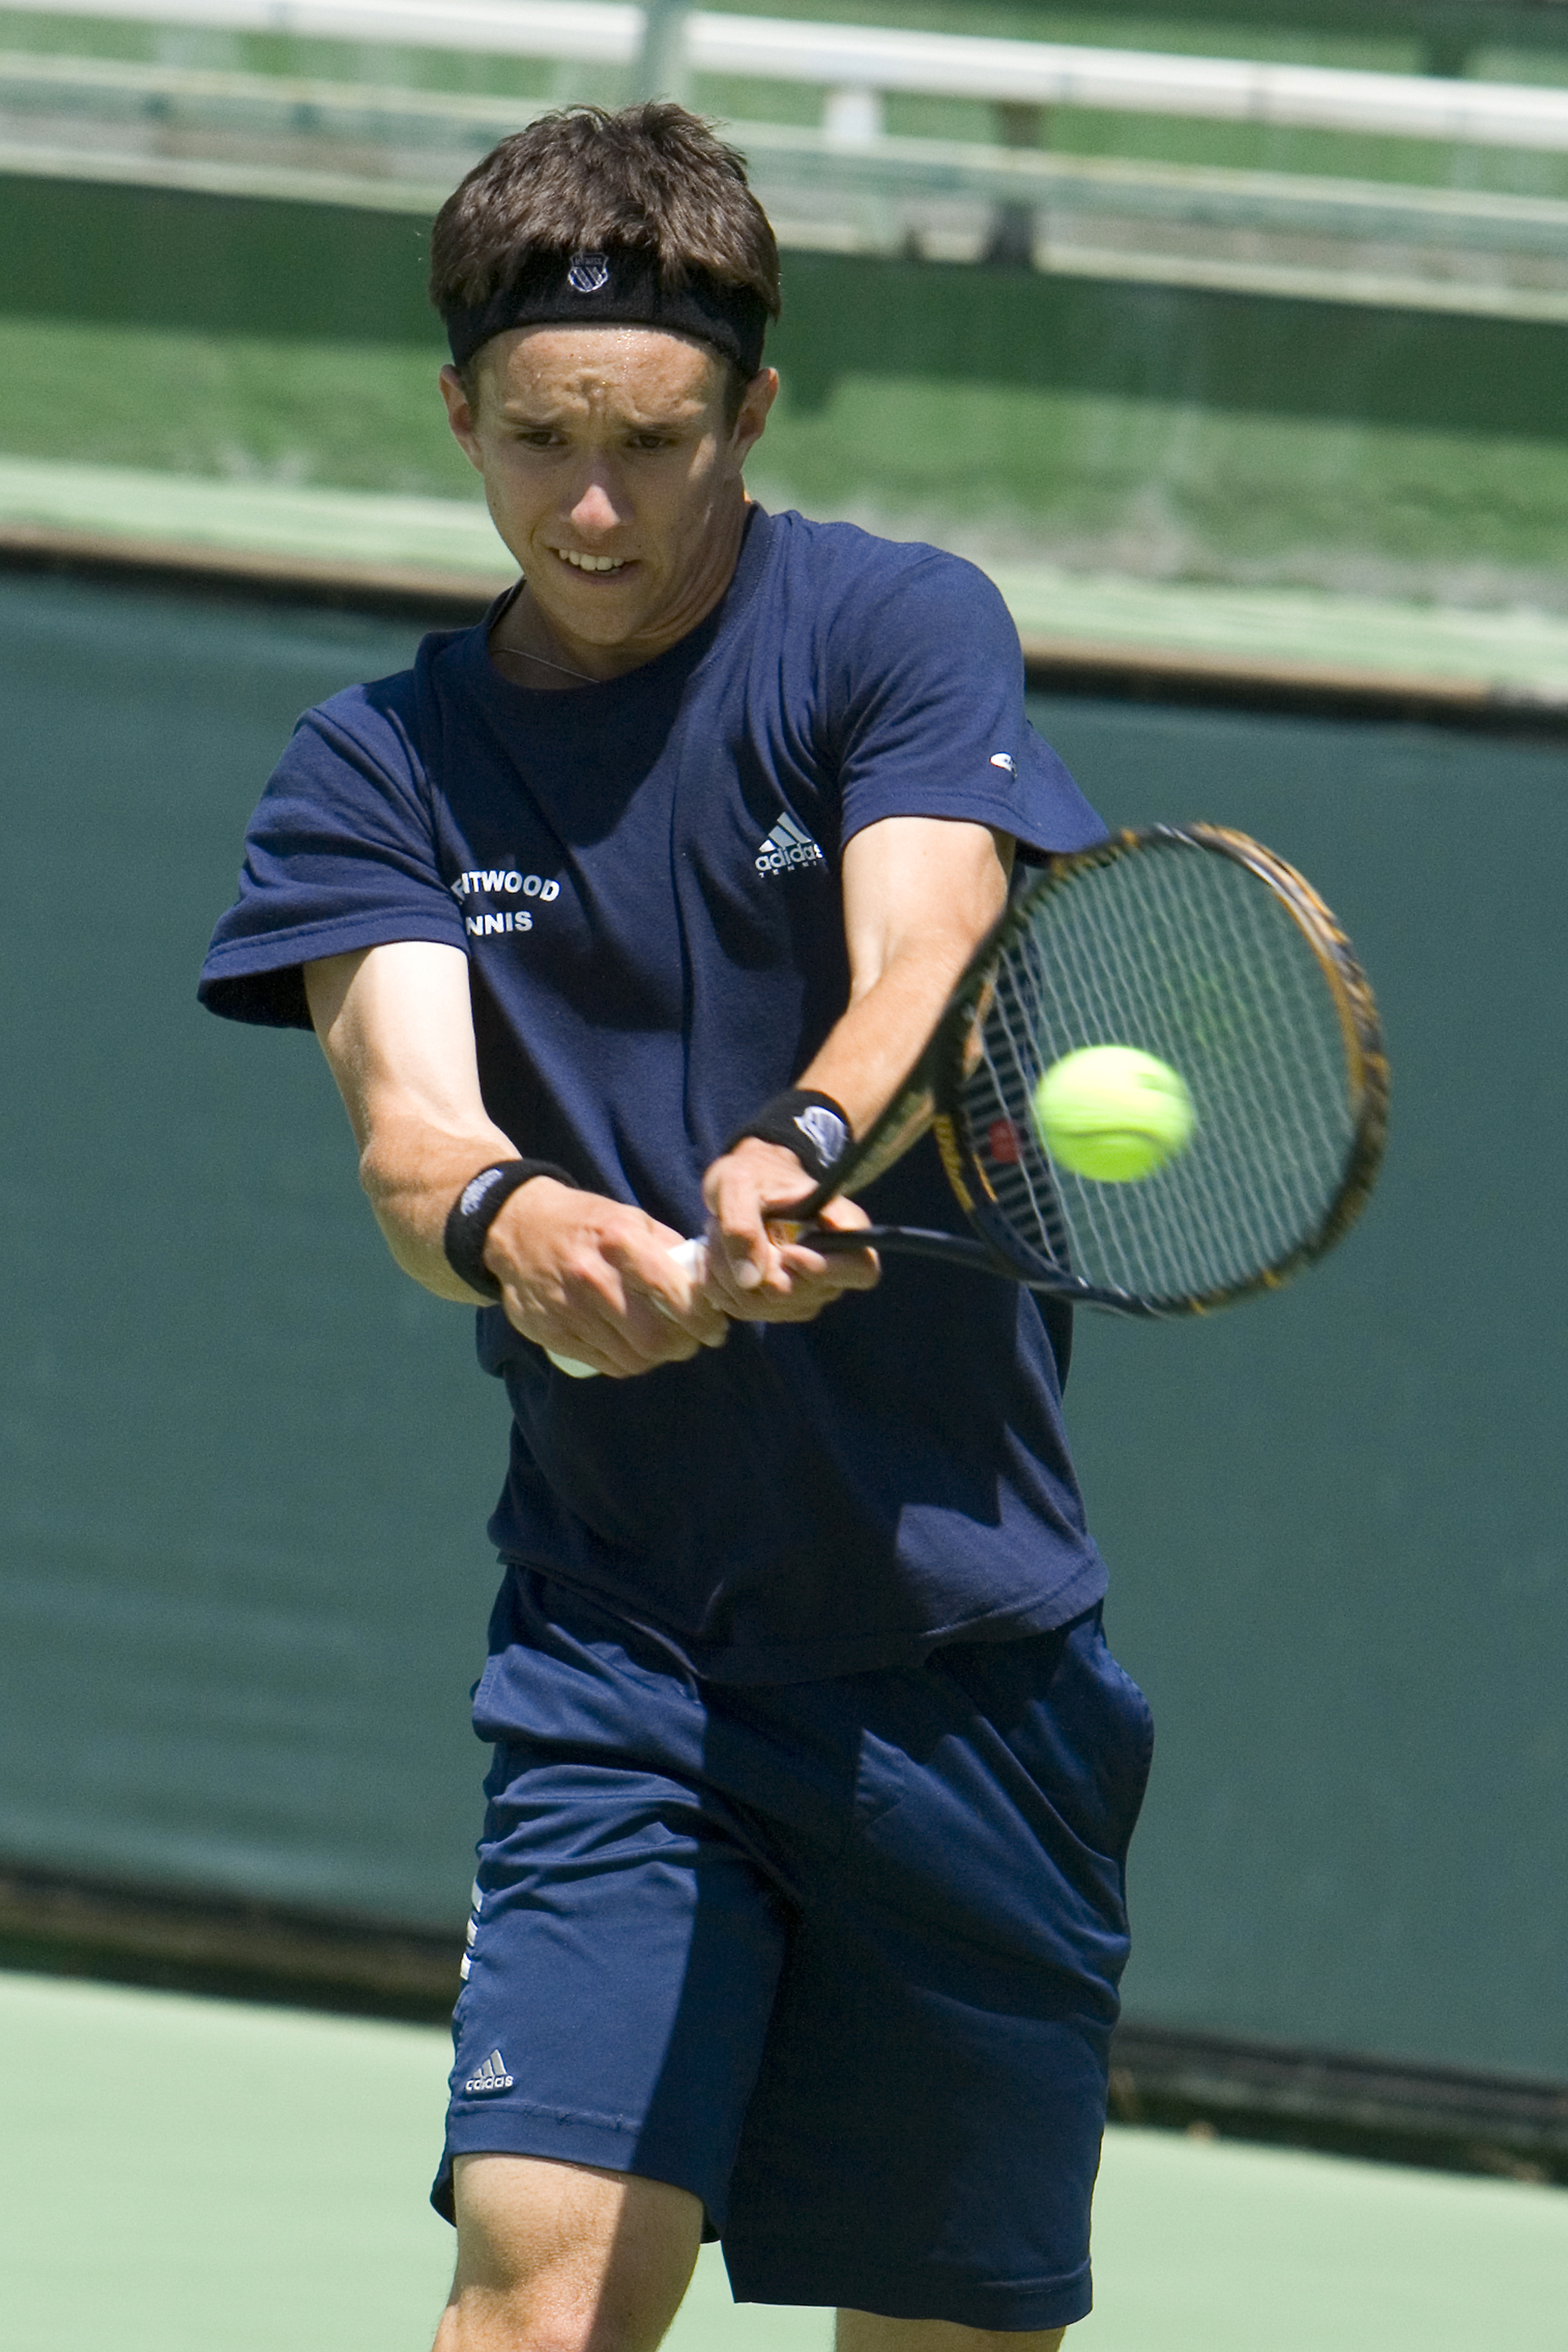 Walker Kehrer smacks a backhand winner during the CIF Division III finals May 28 in Claremont. Photo: Kaye Kittrell